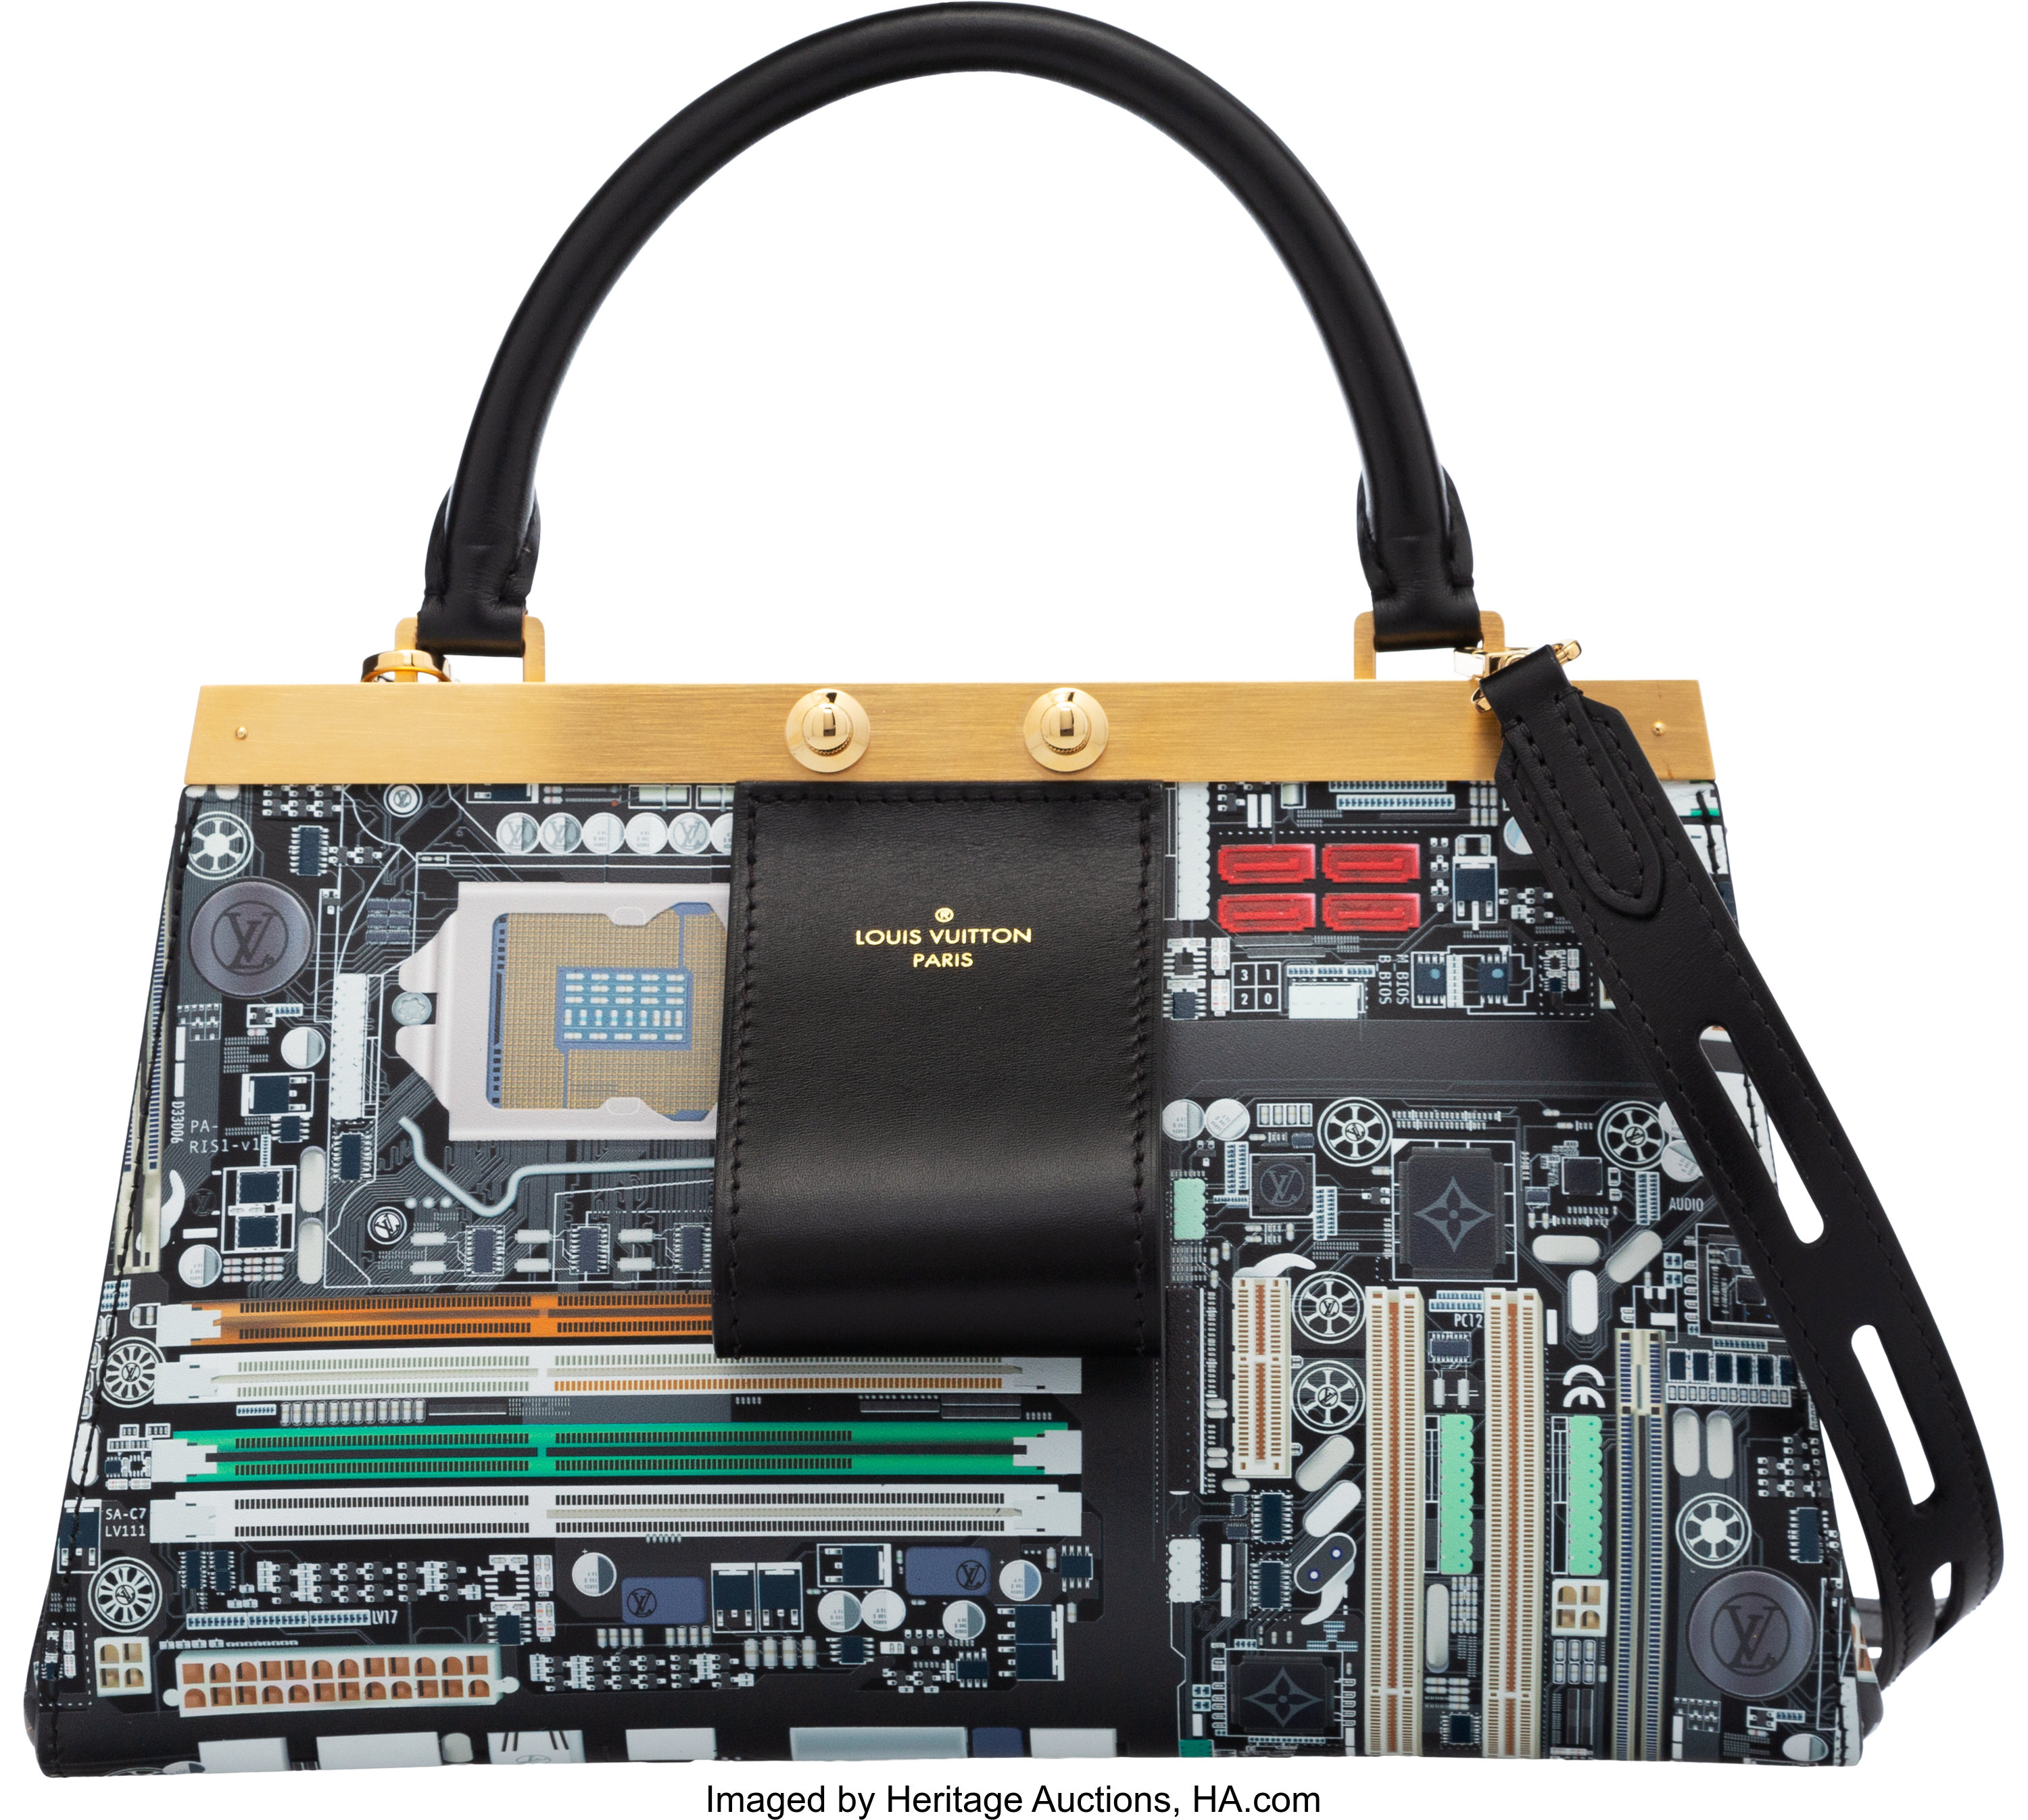 Louis Vuitton Limited Edition Motherboard Crown Frame Bag.